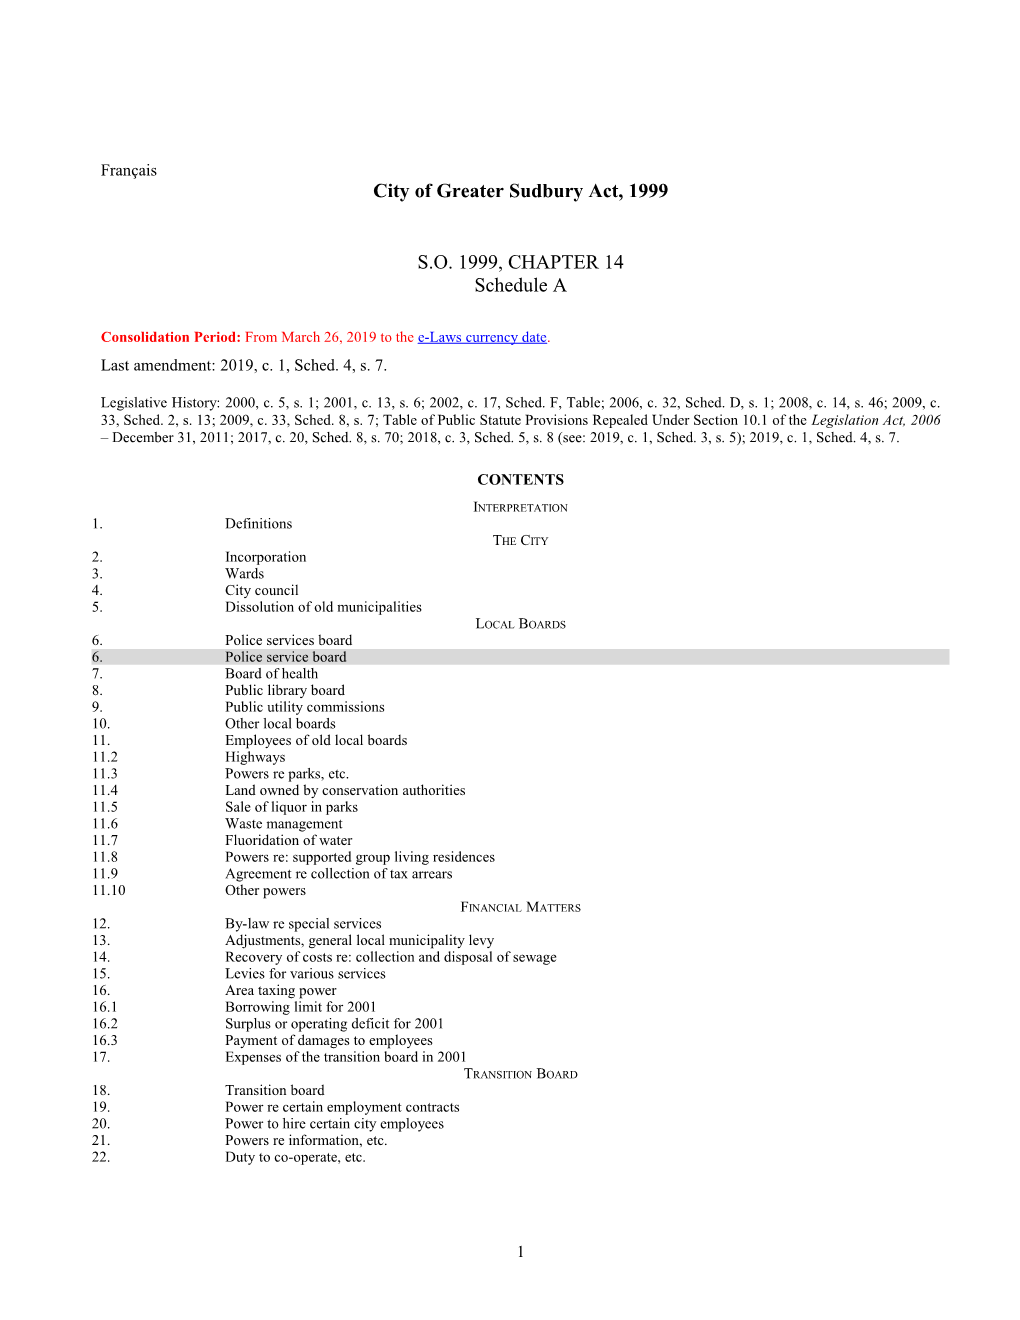 City of Greater Sudbury Act, 1999, S.O. 1999, C. 14, Sched. A